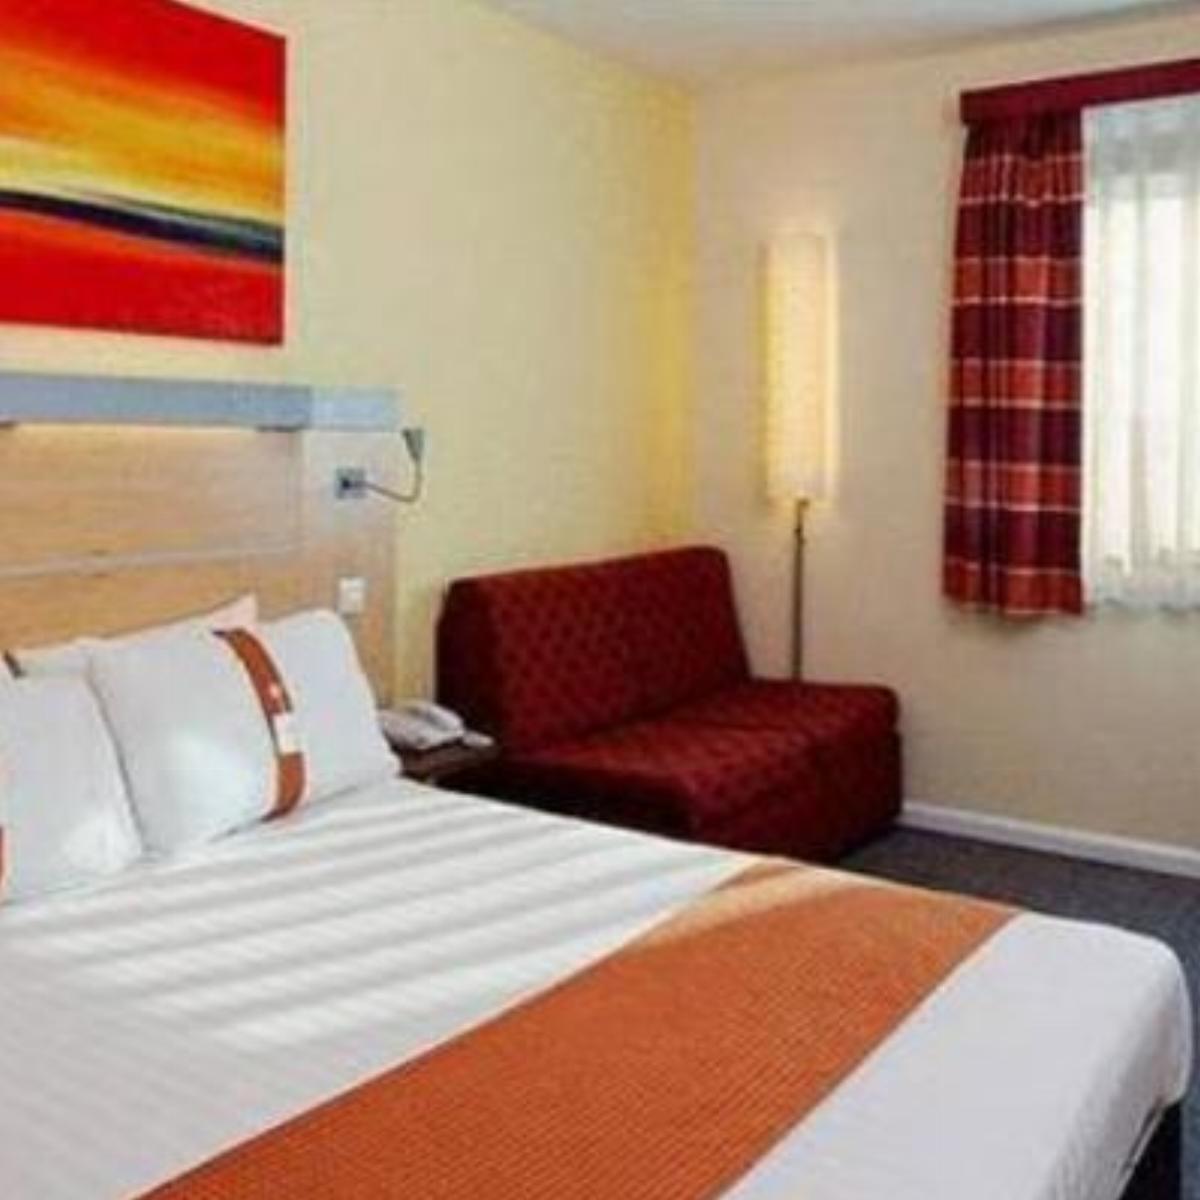 Express By Holiday Inn Hotel Doncaster United Kingdom